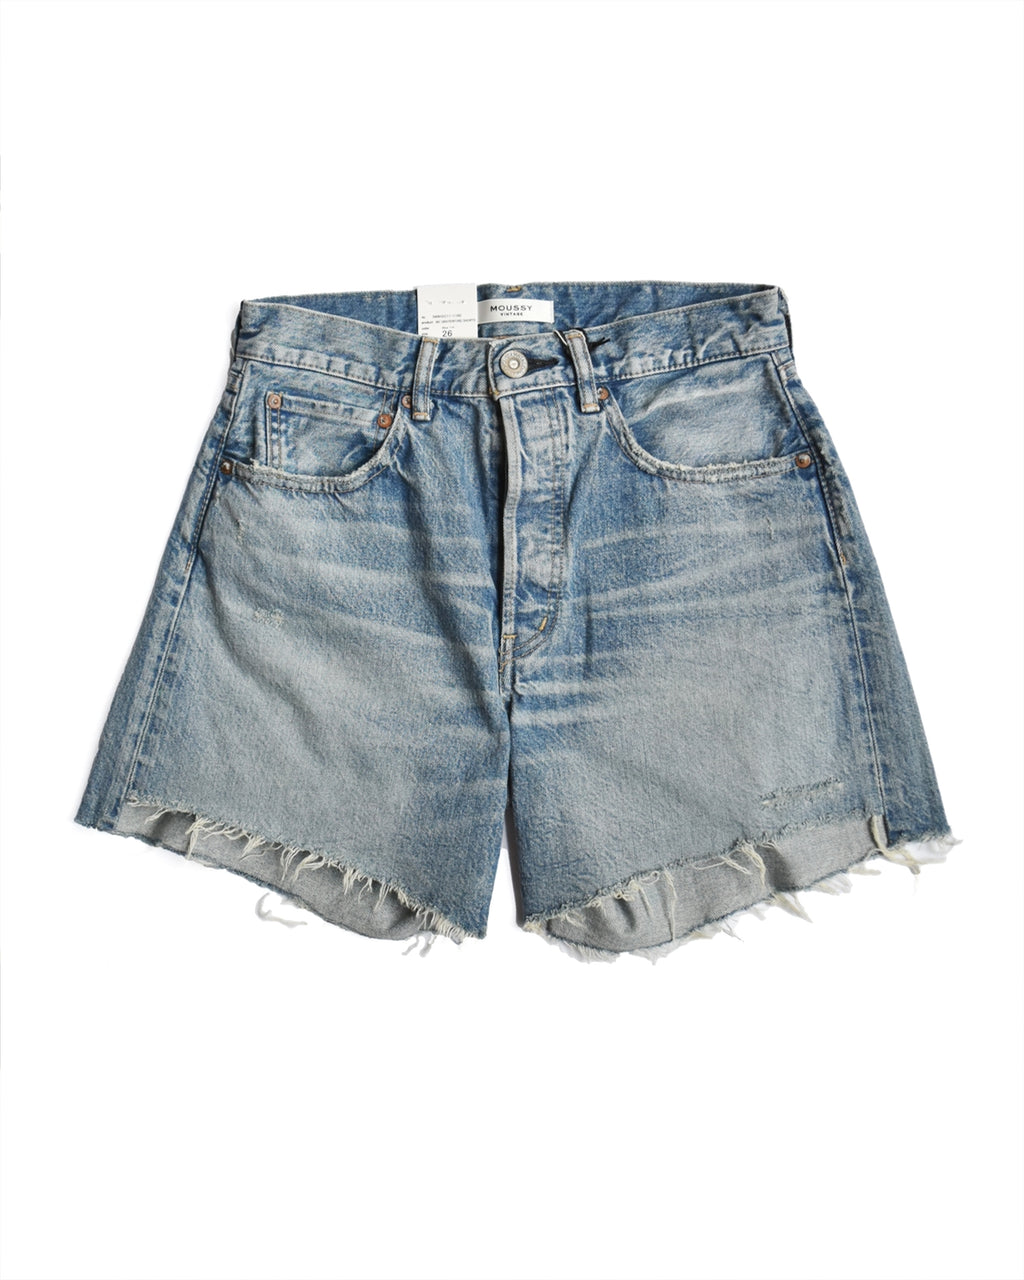 Moussy Graterford Cutoff Jean Shorts